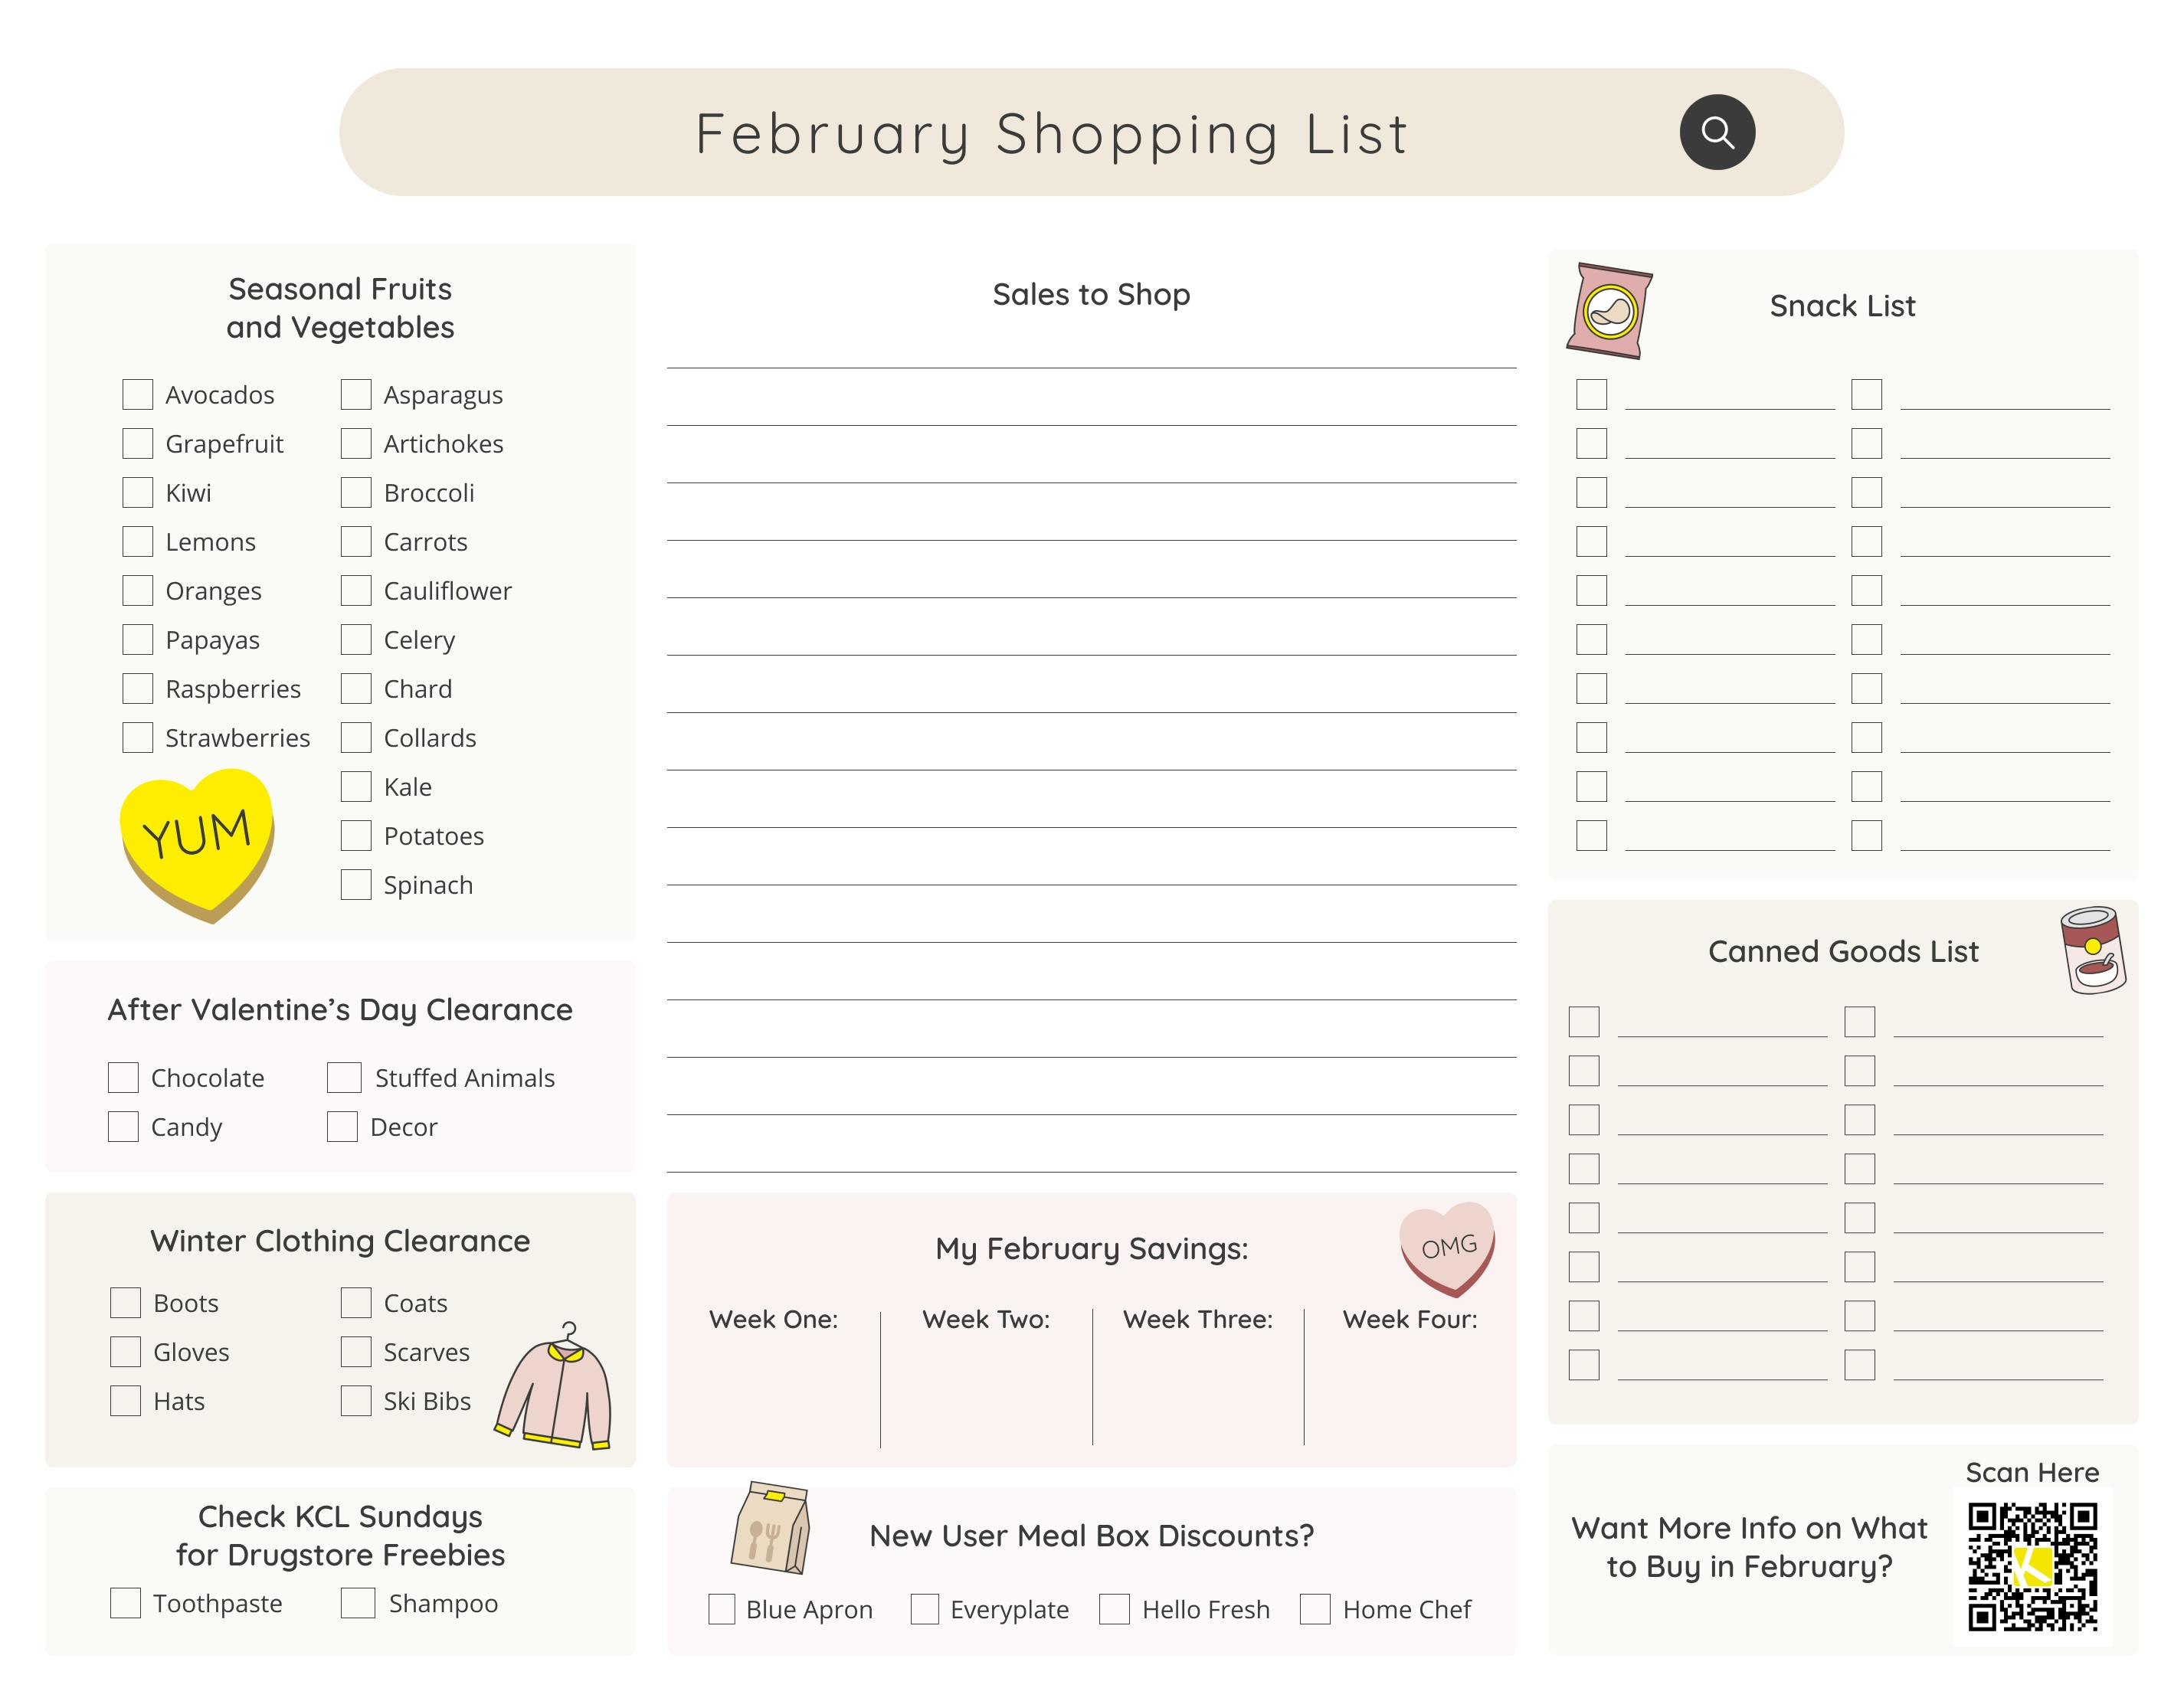 A shopping list for what to buy in February